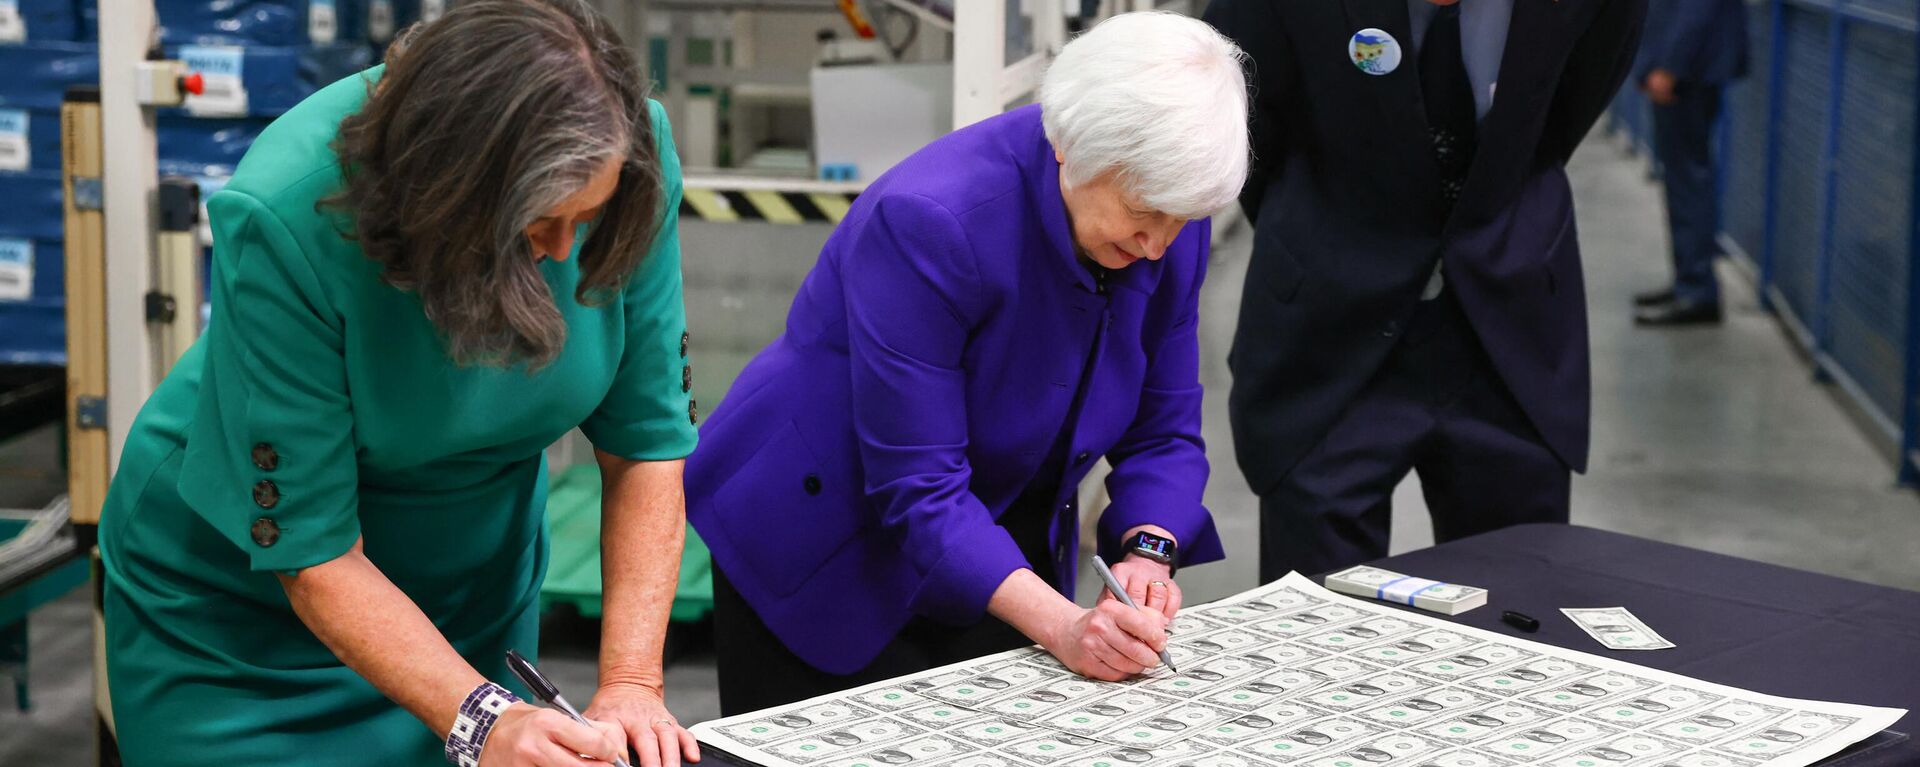 Bureau of Engraving and Printing Director Leonard Olijar (R) watches as US Treasury Secretary Janet Yellen (C) and Treasurer Marilynn Malerba sign one dollar bills at the Bureau of Engraving and Printing Western Currency Facility on December 8, 2022 in Fort Worth, Texas. - The US dollar will bear two women's signatures for the first time, belonging to Treasury Secretary Janet Yellen and Treasurer Lynn Malerba, officials said Thursday as they unveiled the banknotes.  - Sputnik International, 1920, 13.04.2023